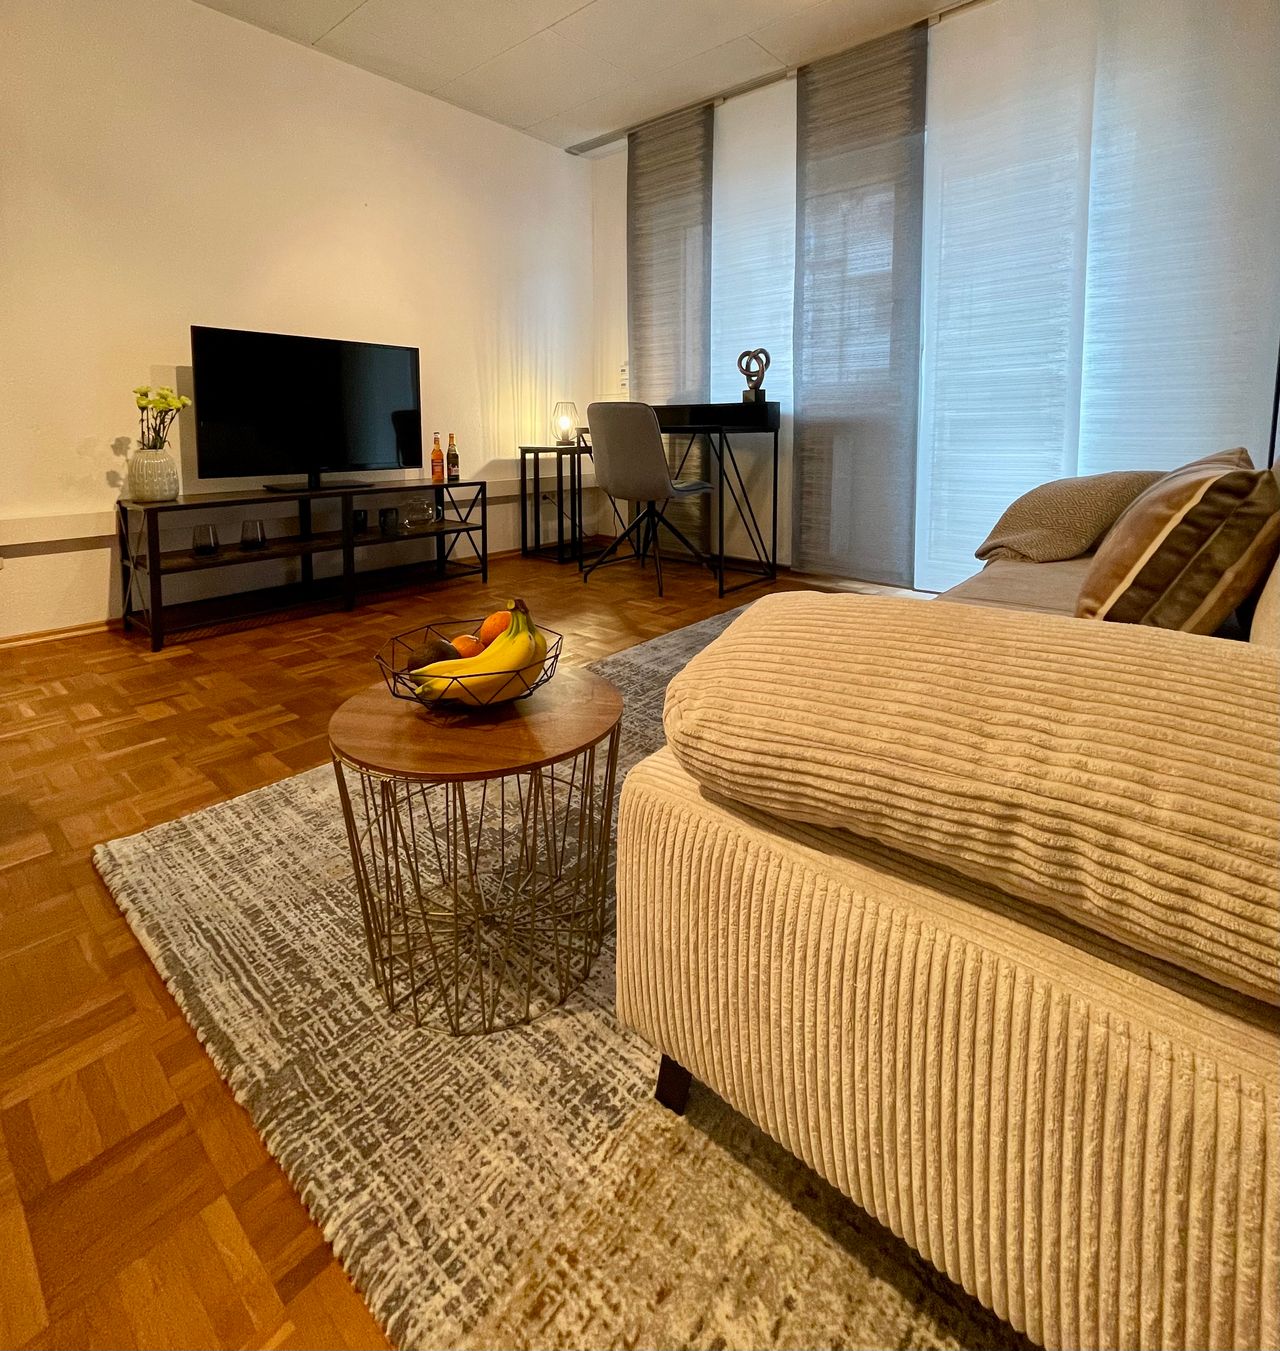 New apartment near city center, air conditioning, high speed internet and XXL bed